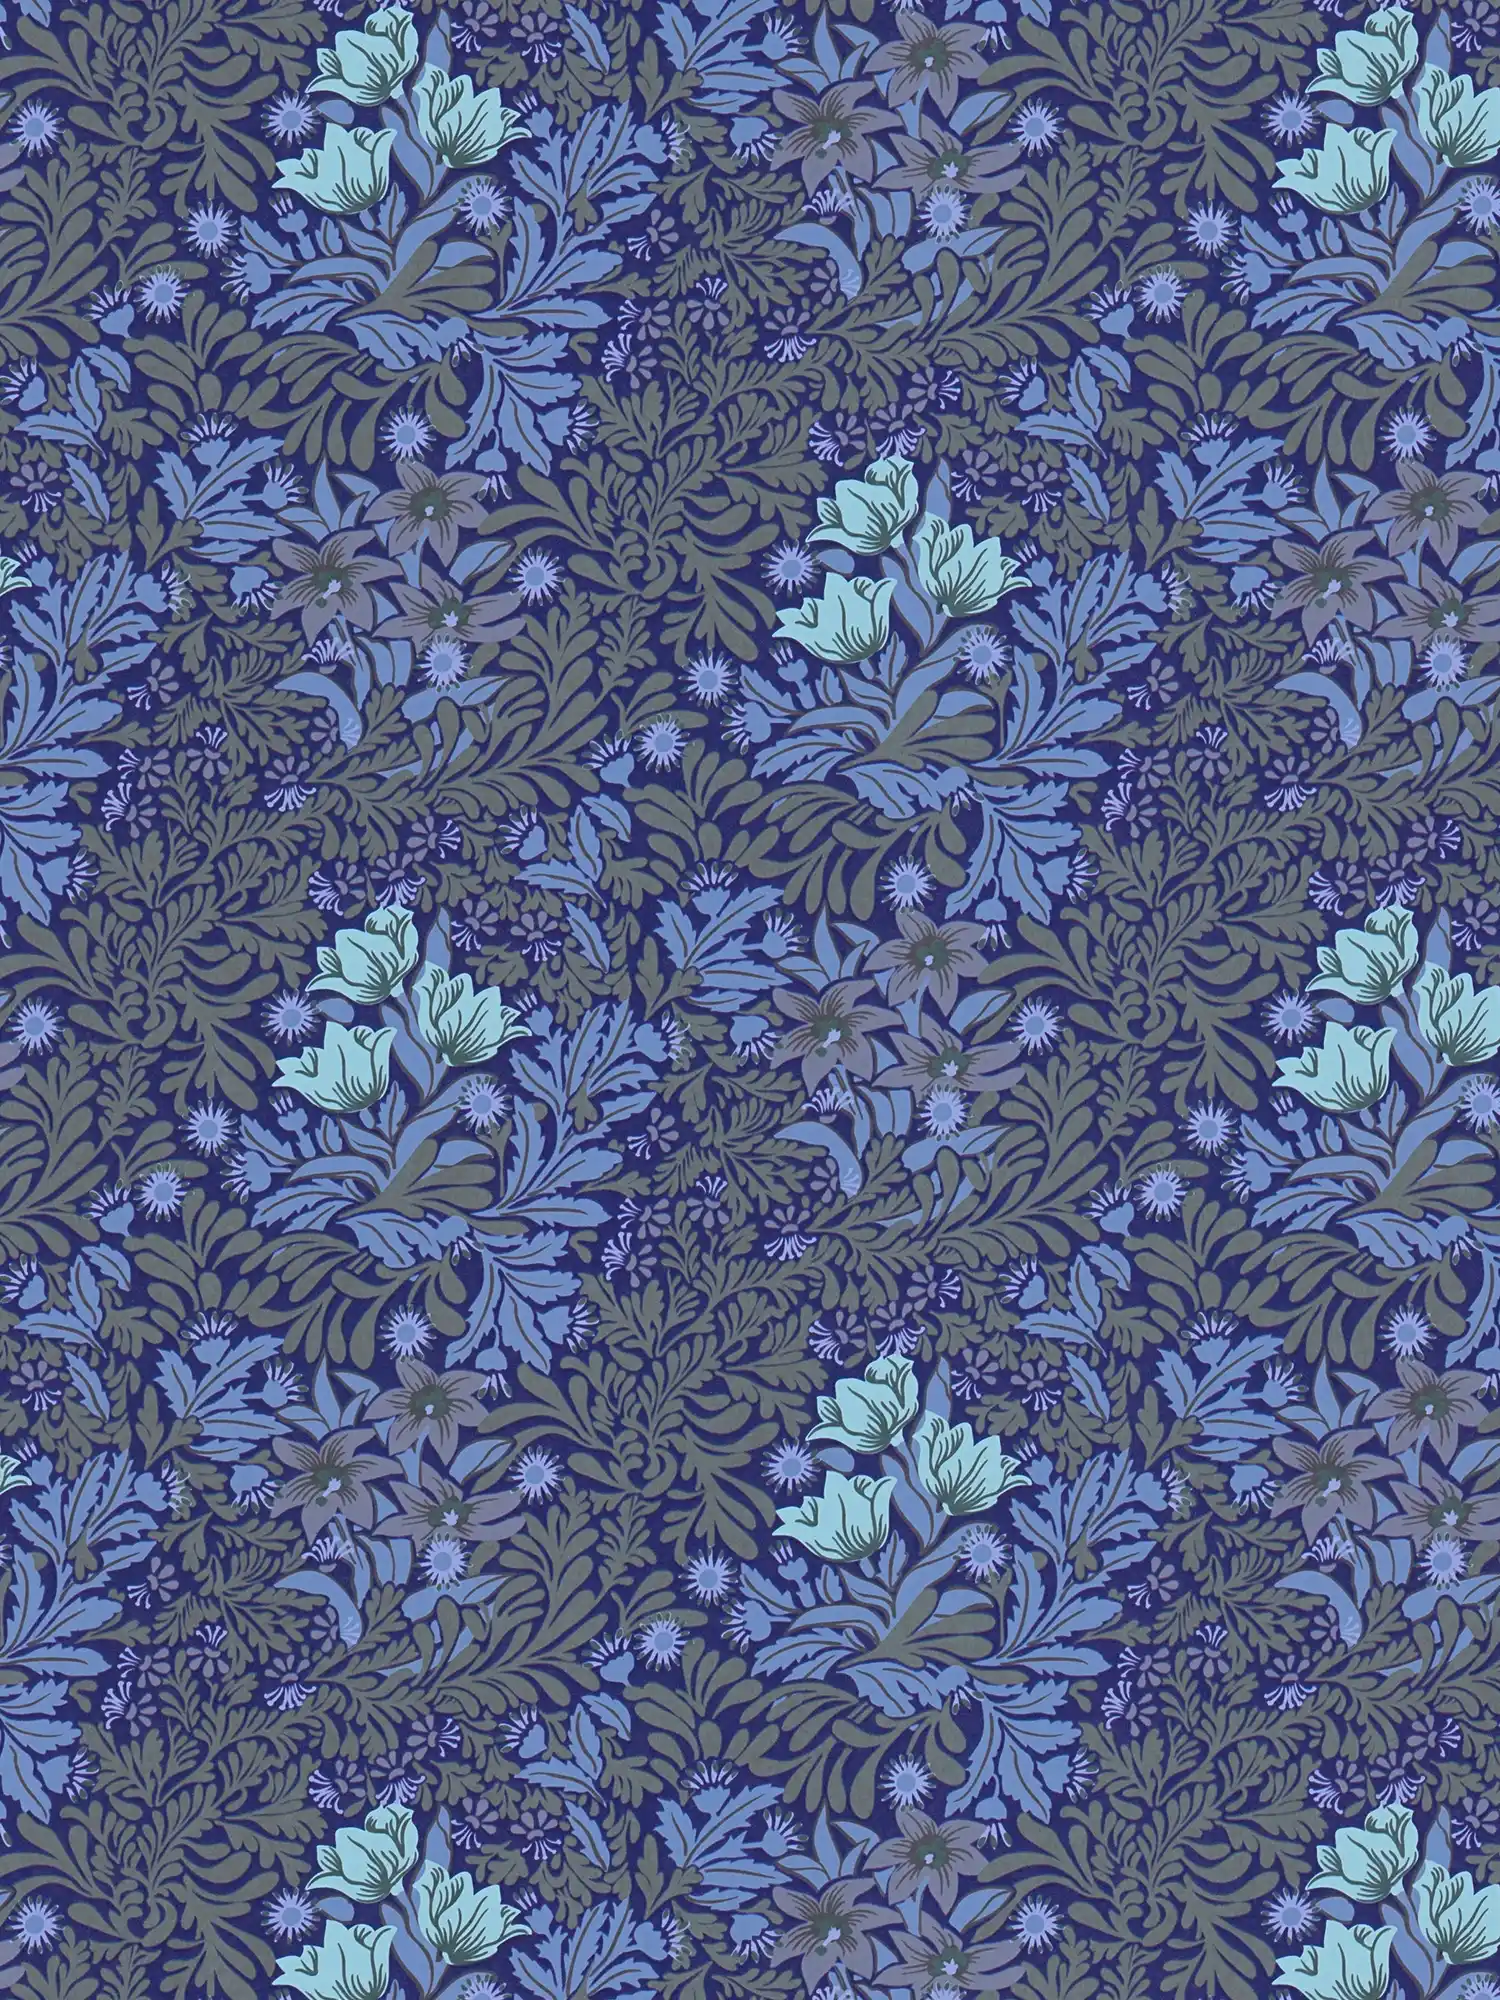 Floral non-woven wallpaper with leaf tendrils and flowers - blue, grey, green
